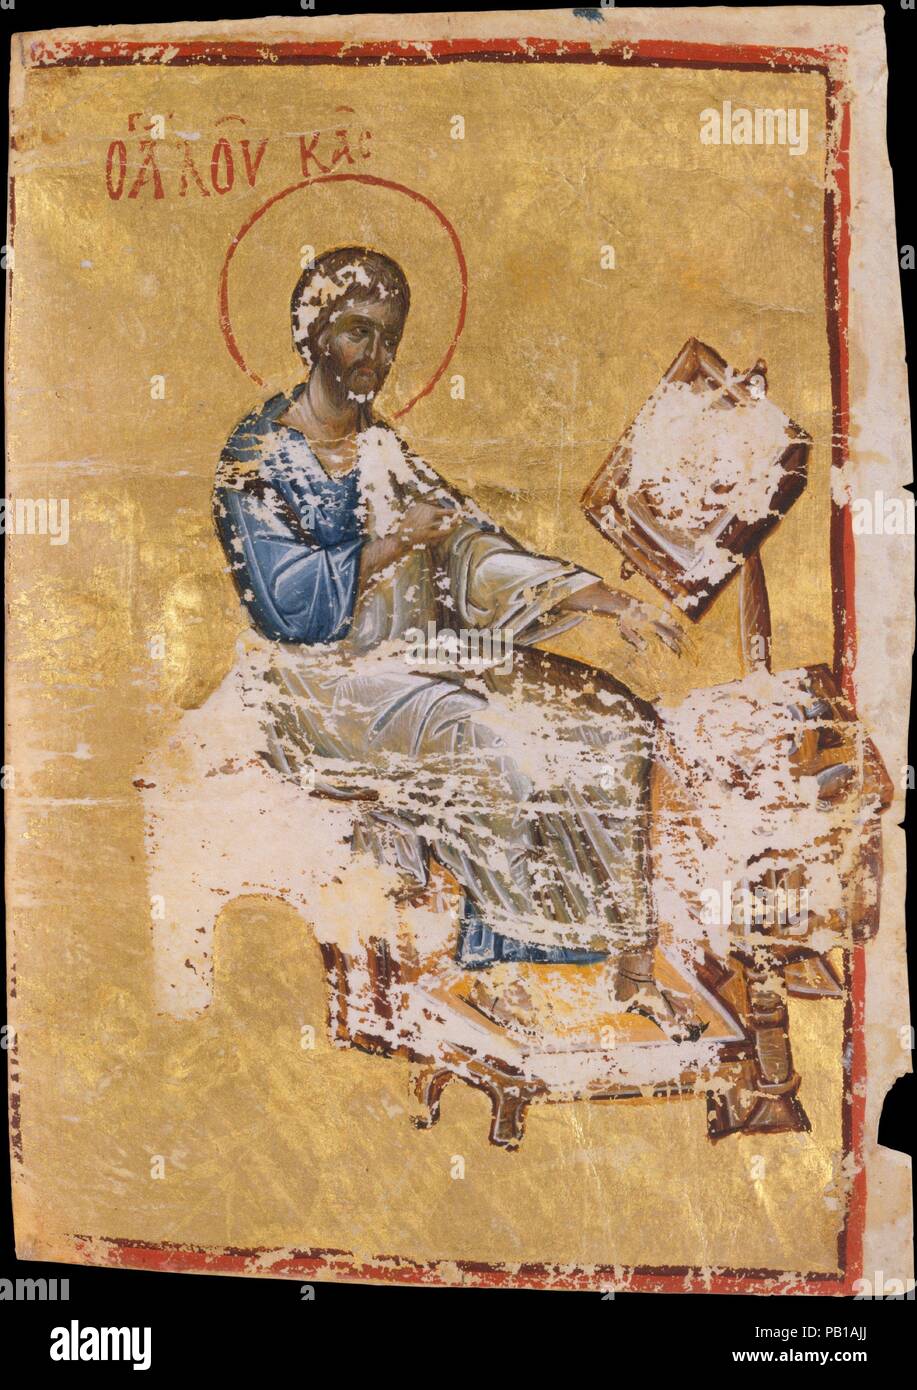 Manuscript Illumination with the Evangelist Luke. Culture: Byzantine. Dimensions: 5 13/16 x 4 1/16 in.  (14.7 x 10.3 cm). Date: late 13th-early 14th century.  On a single page from a gospel book, the illumination shows the evangelist Luke seated on a backless chair, reaching with his left arm toward the open book on a pedestal before him. He wears a loose-fitting blue tunic and white himation, and sandals on his feet. He holds a quill pen in his right hand as he pauses to contemplate the text. His sandaled feet rest on a footstool, next to a small book cabinet that extends beyond the border of Stock Photo